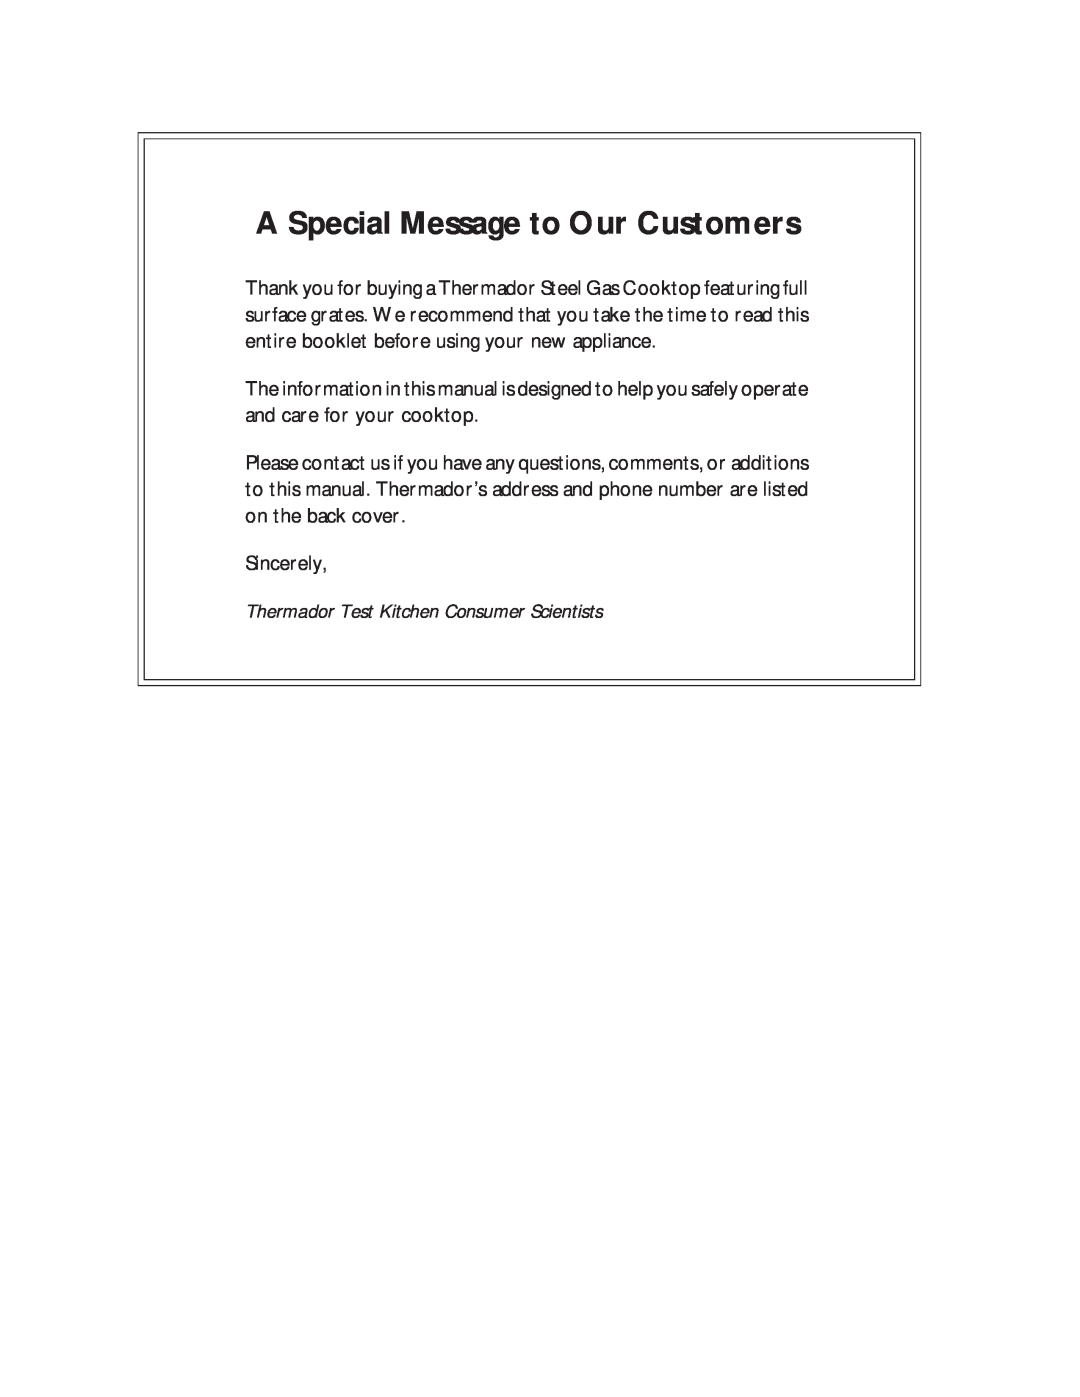 Thermador SGCS456, SGC456 owner manual A Special Message to Our Customers, Thermador Test Kitchen Consumer Scientists 